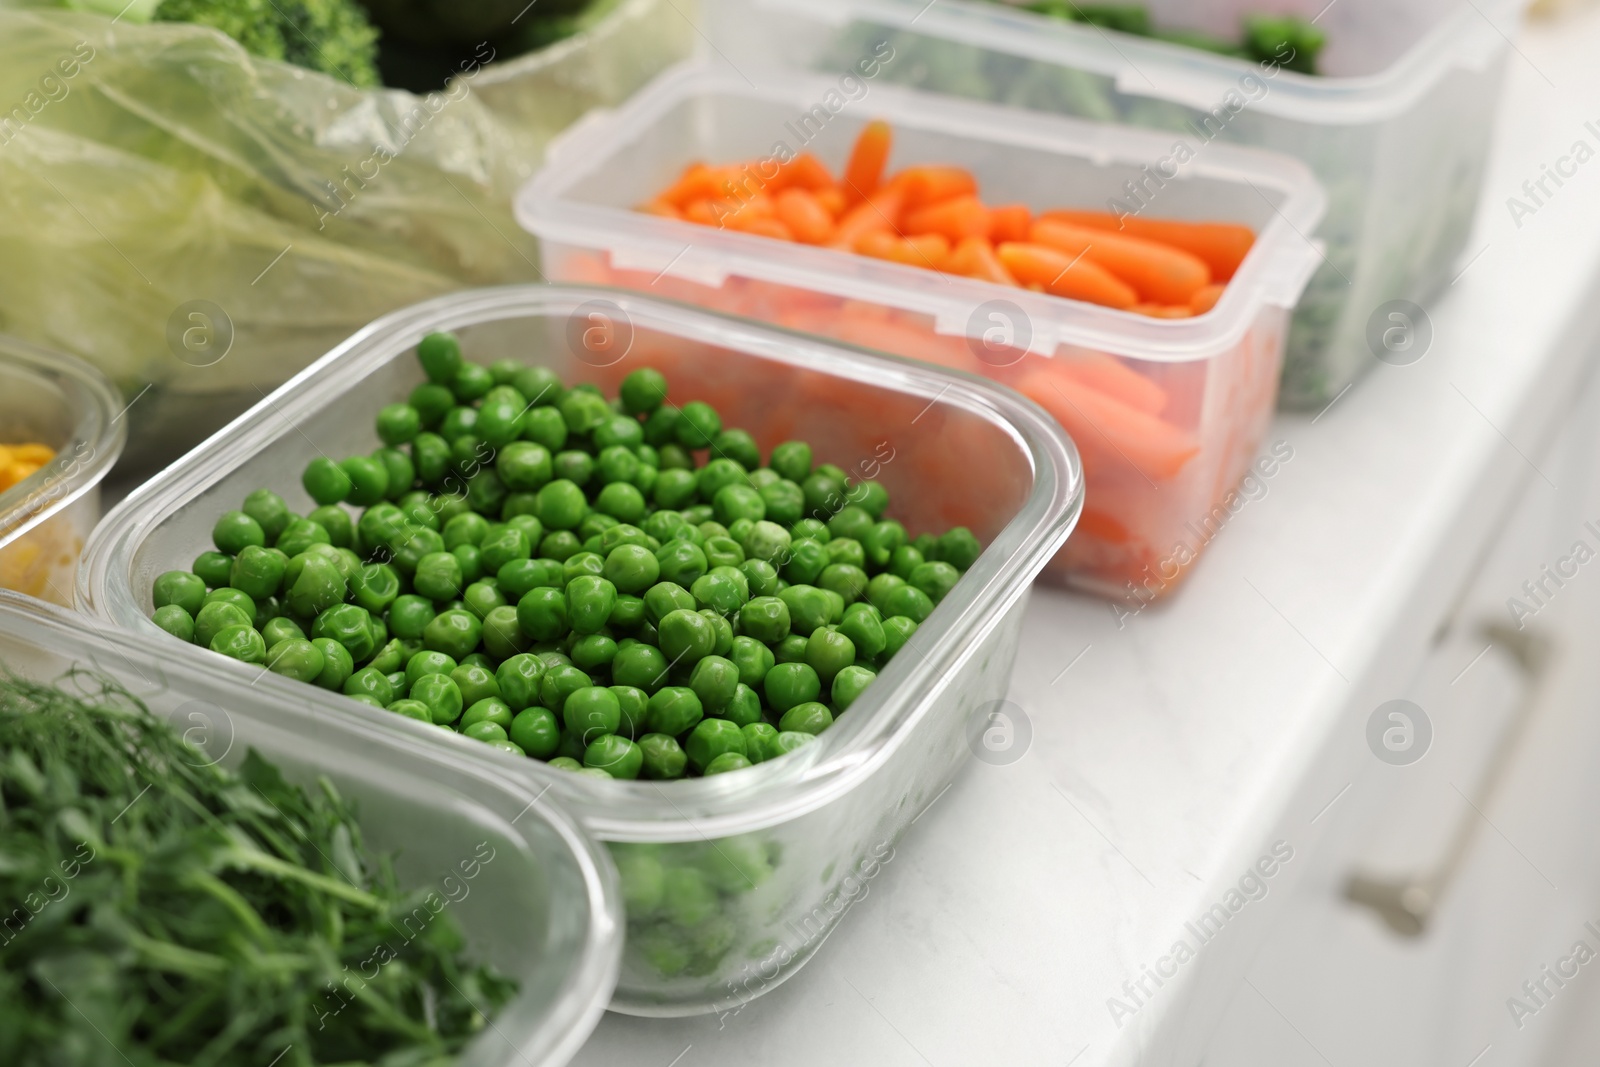 Photo of Plastic and glass containers with different fresh products on white countertop, closeup